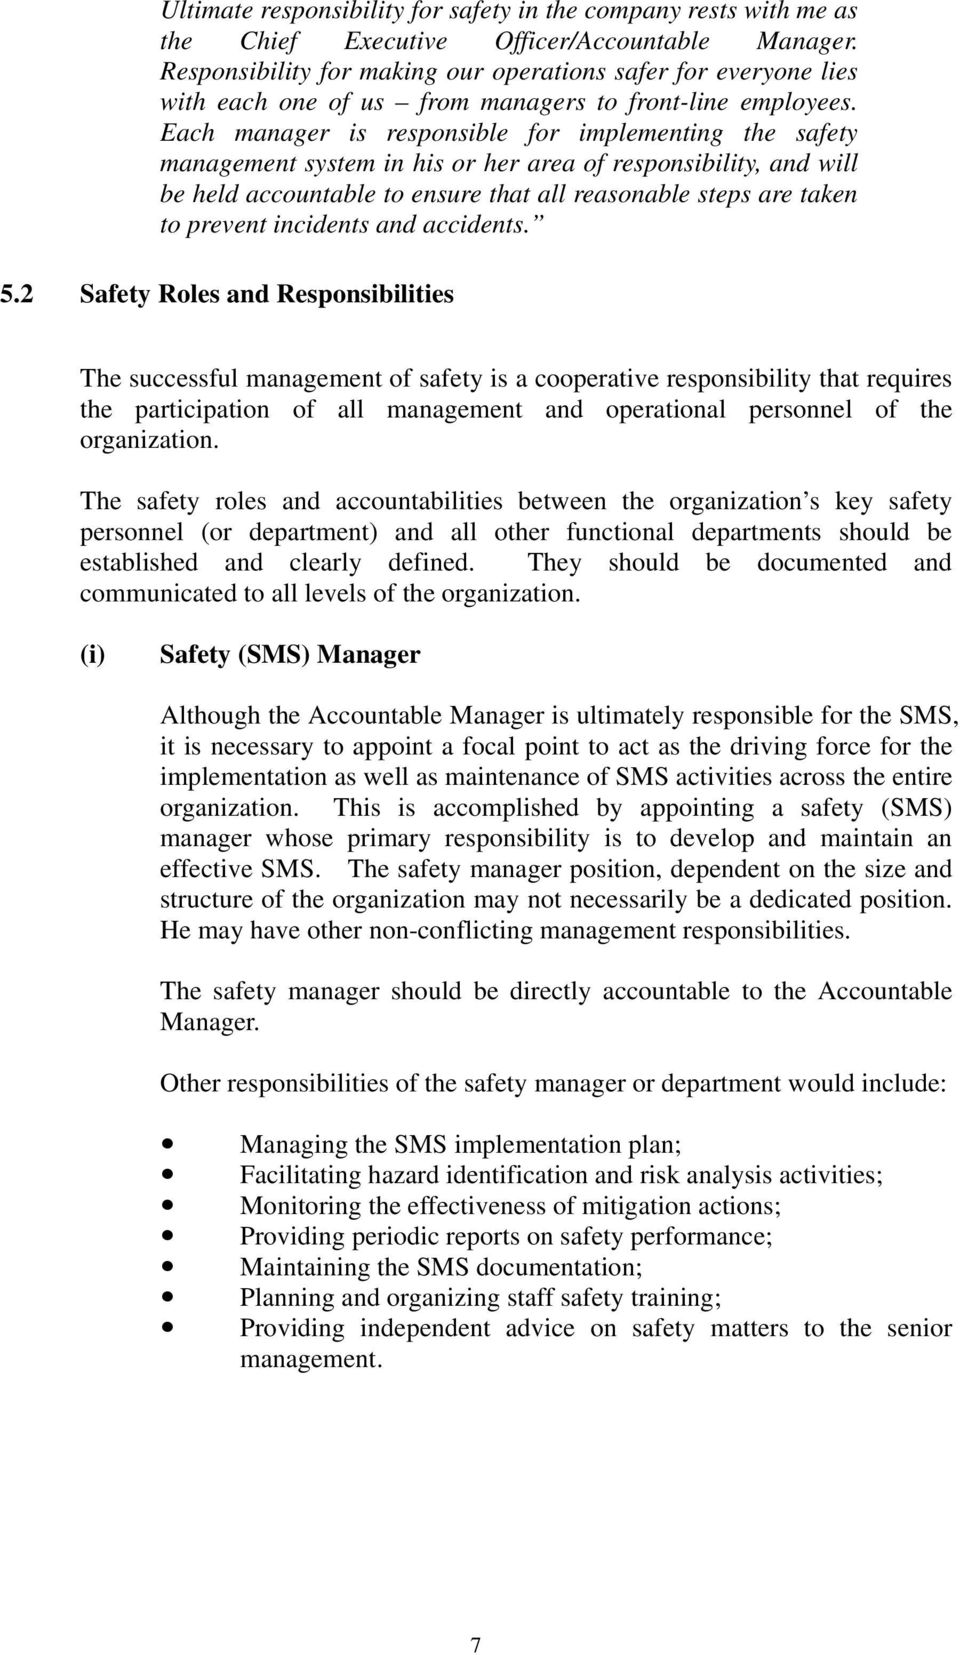 Each manager is responsible for implementing the safety management system in his or her area of responsibility, and will be held accountable to ensure that all reasonable steps are taken to prevent